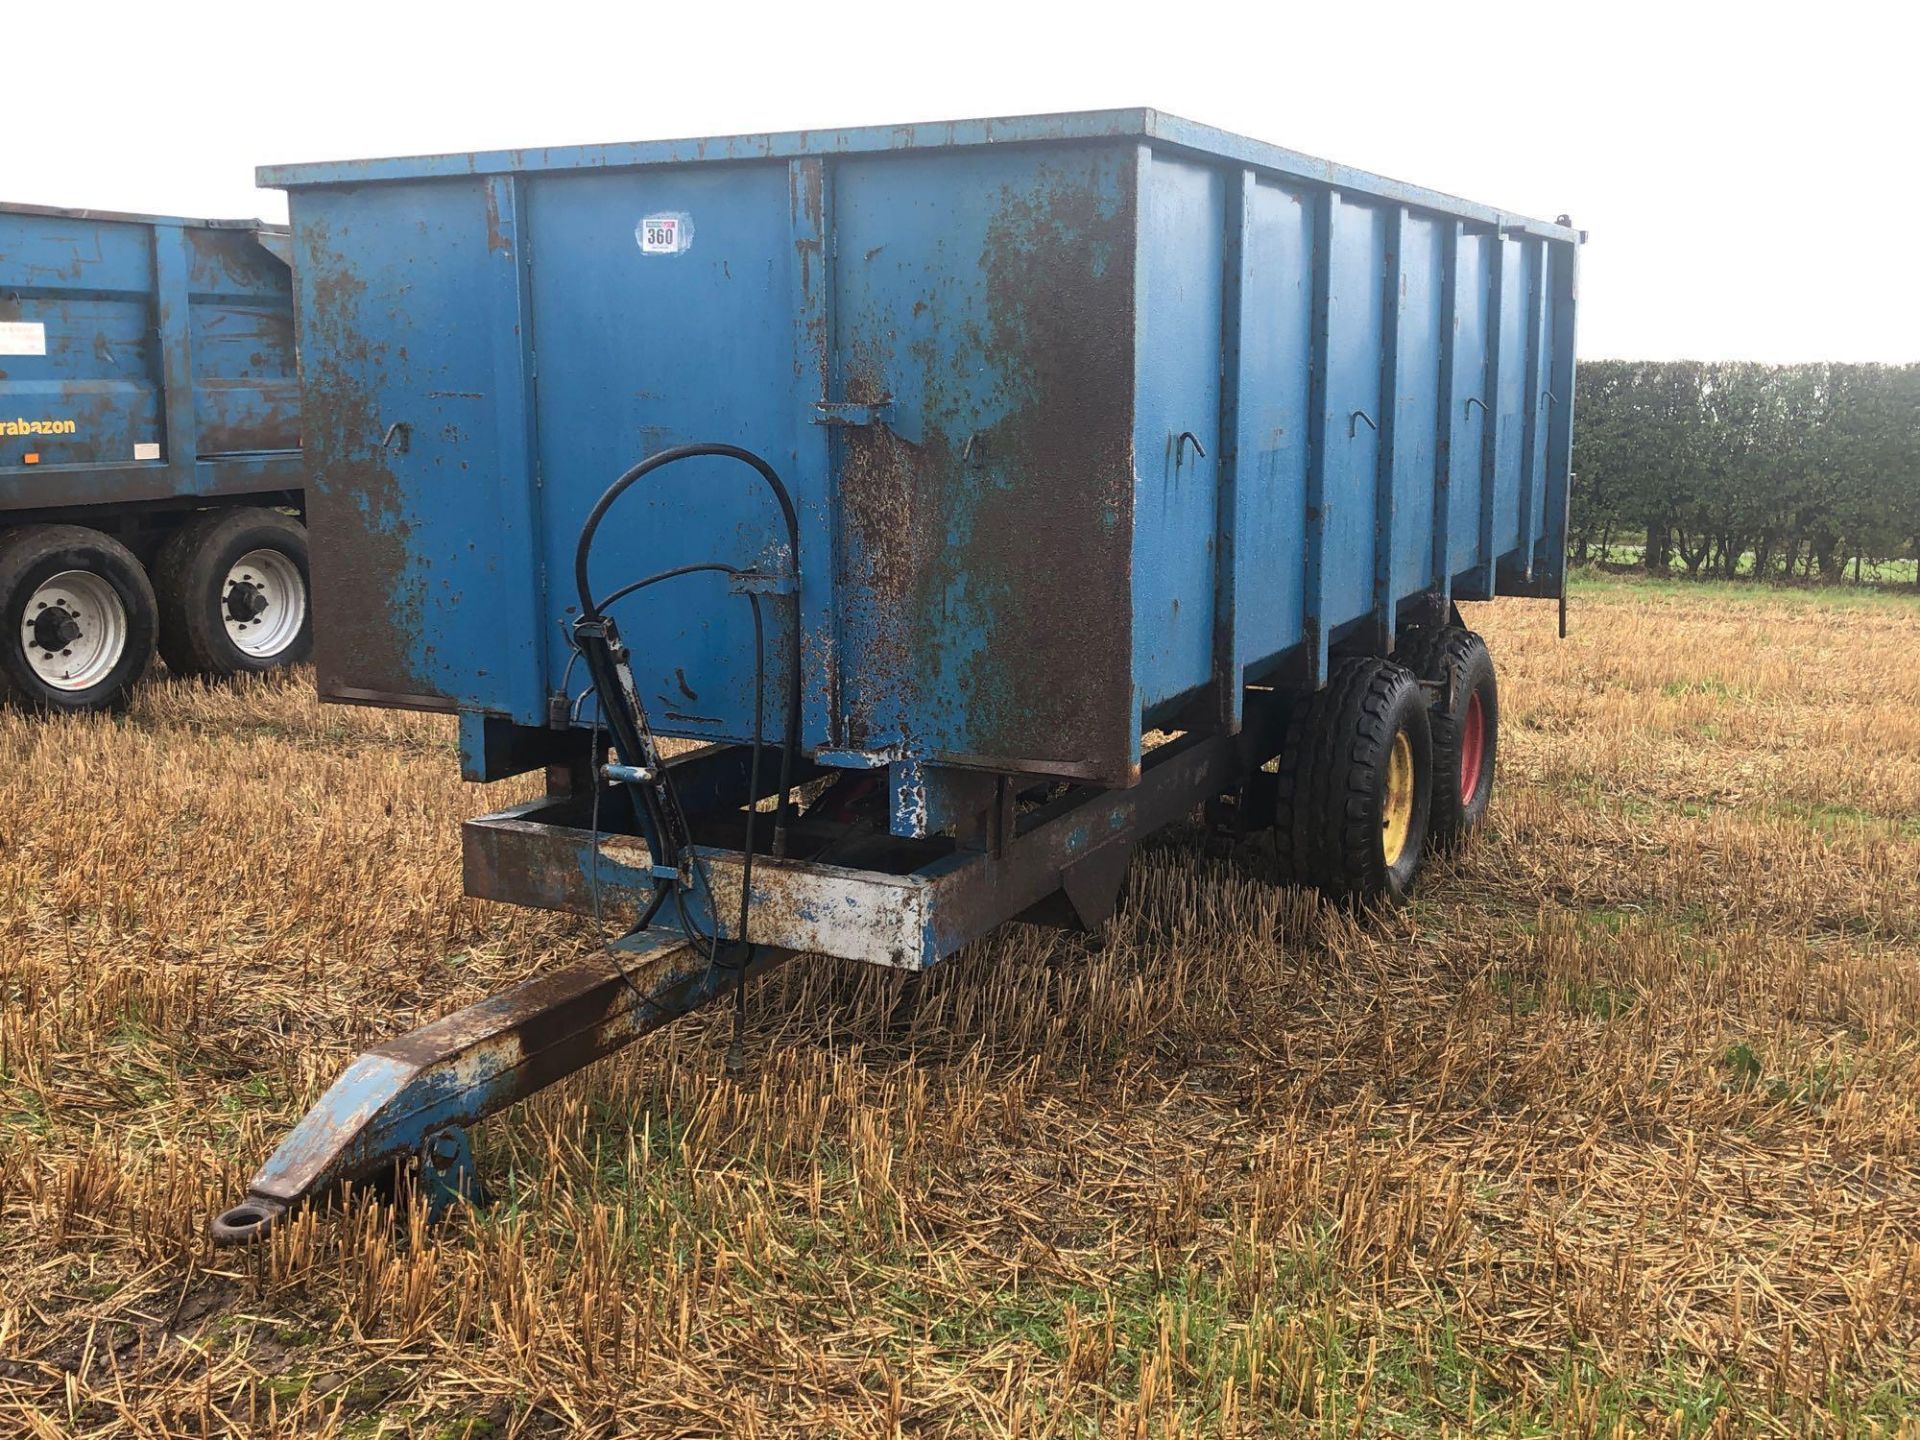 8t twin axle trailer with manual rear door and grain chute. C/w silage sides. On 12.5/80-15.3 wheels - Image 3 of 8